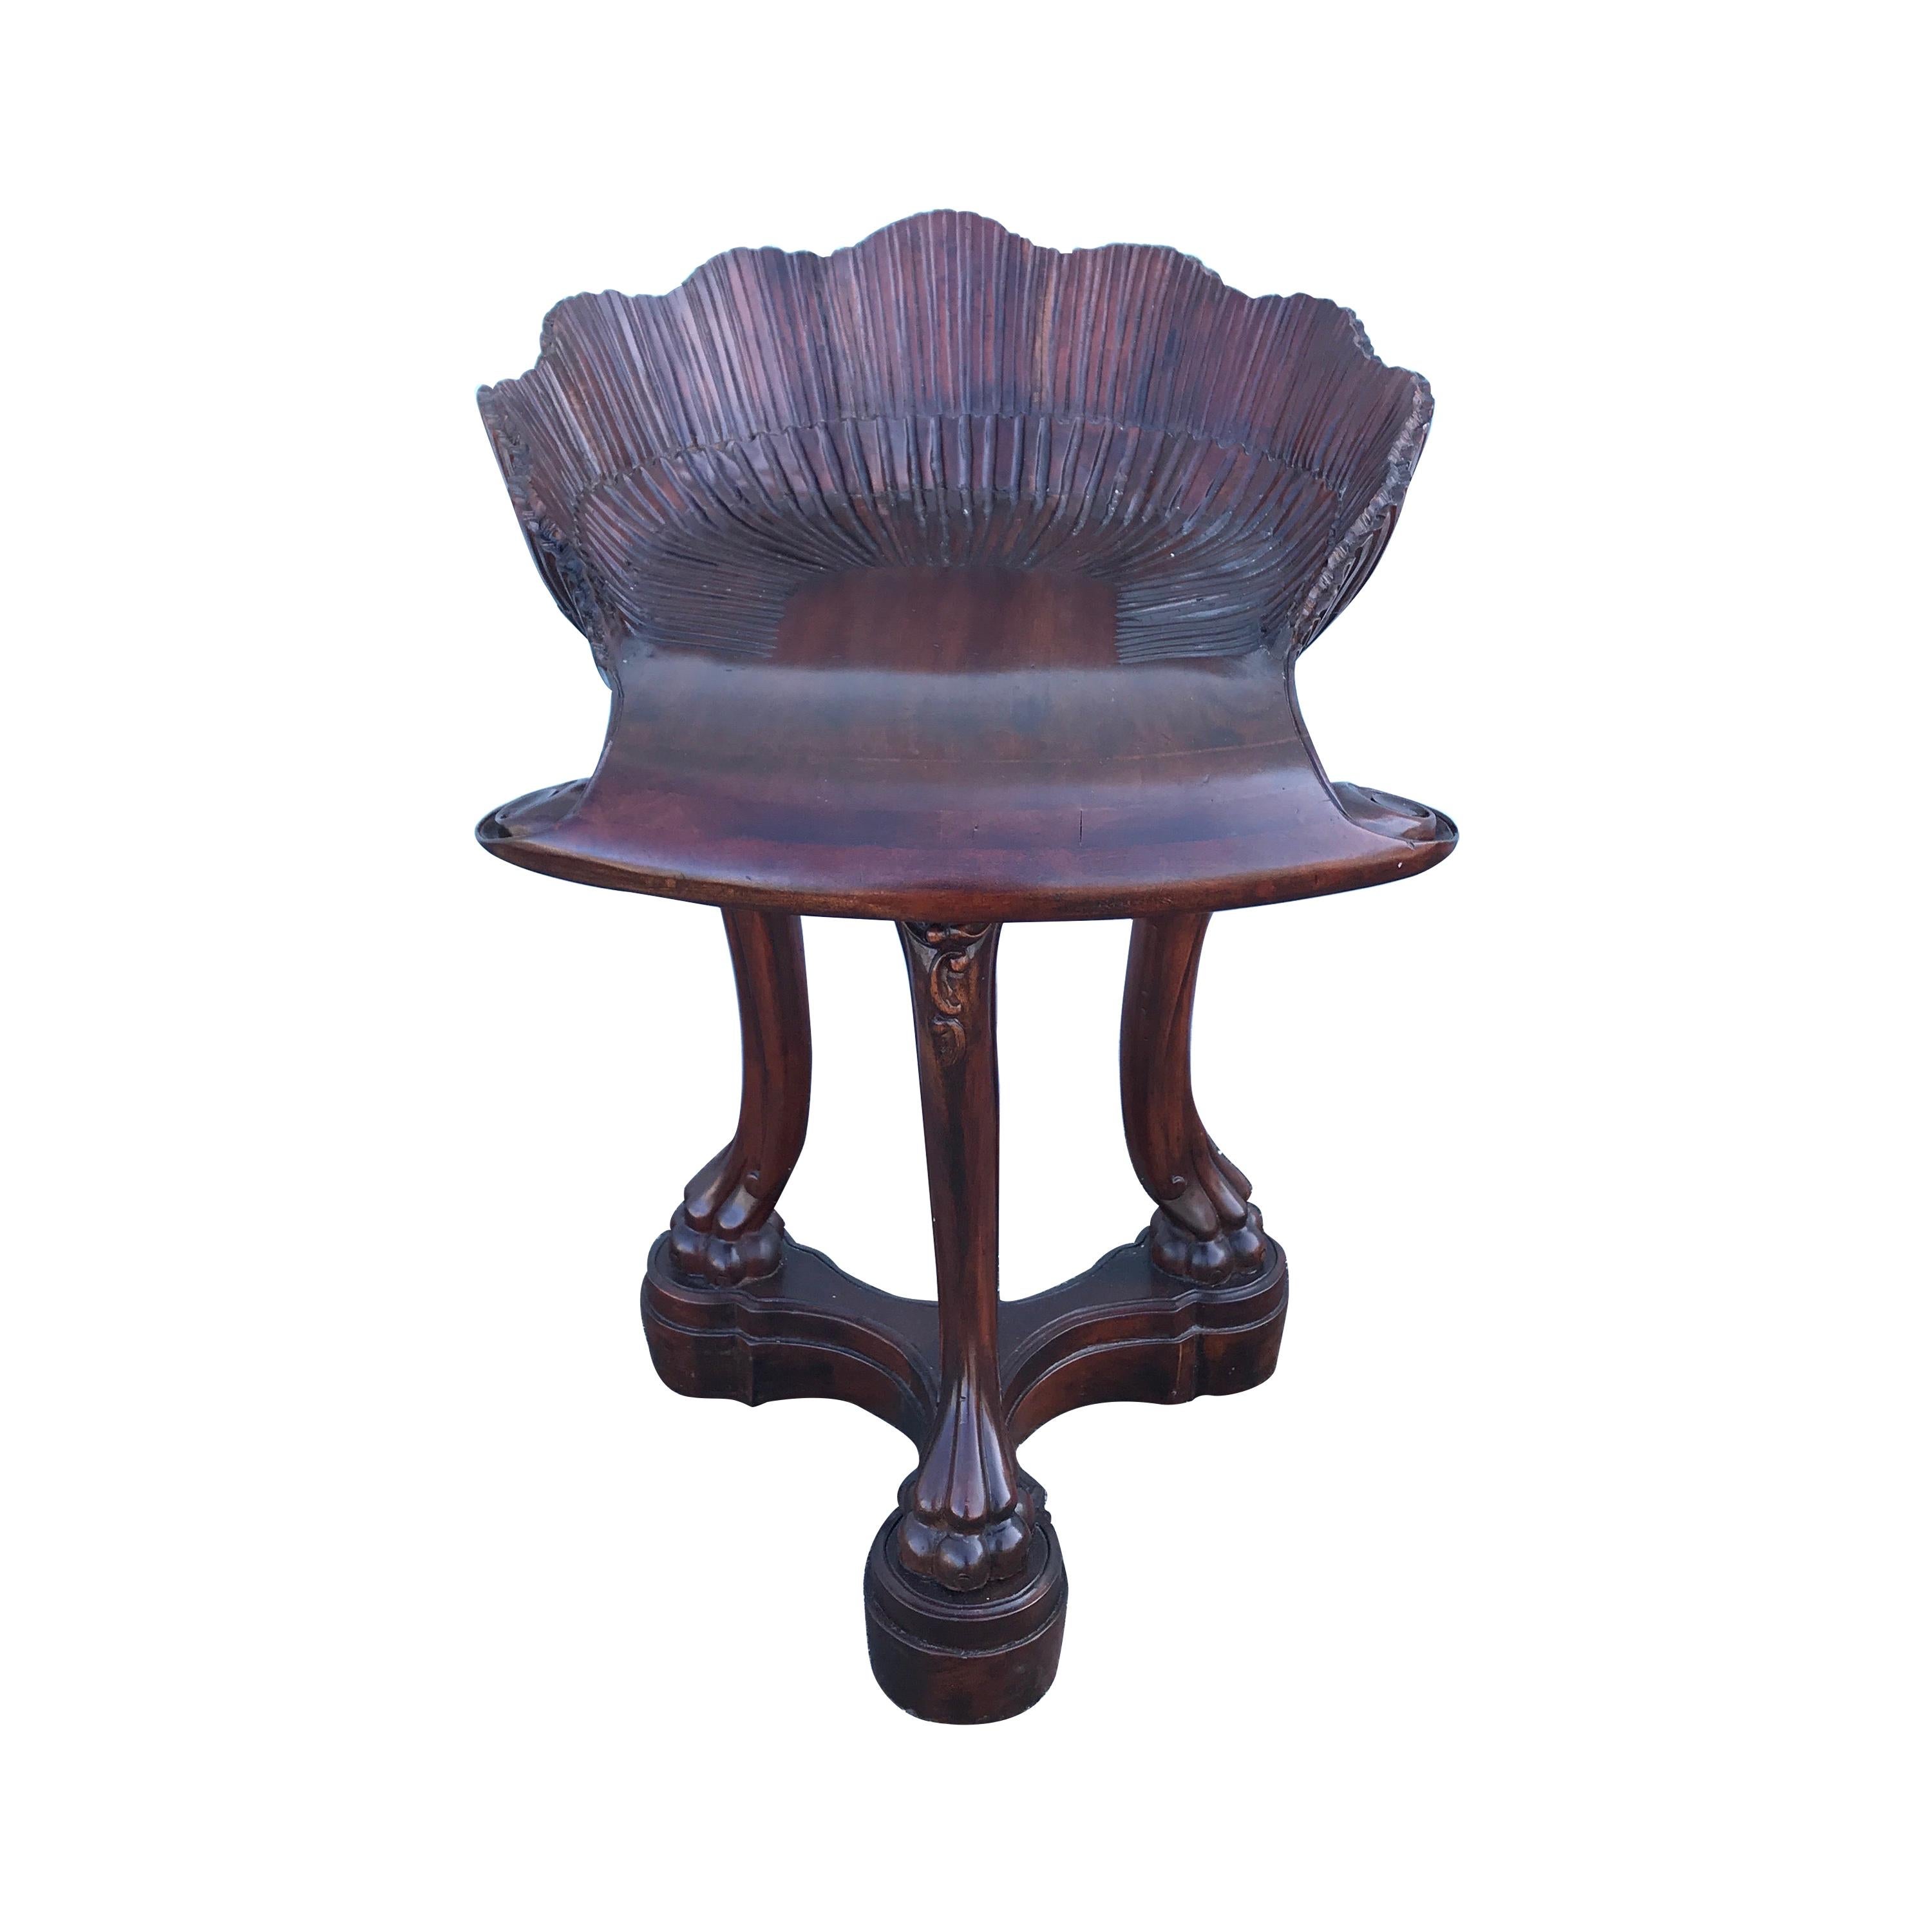 Carved Wood Grotto Style Shell Stool